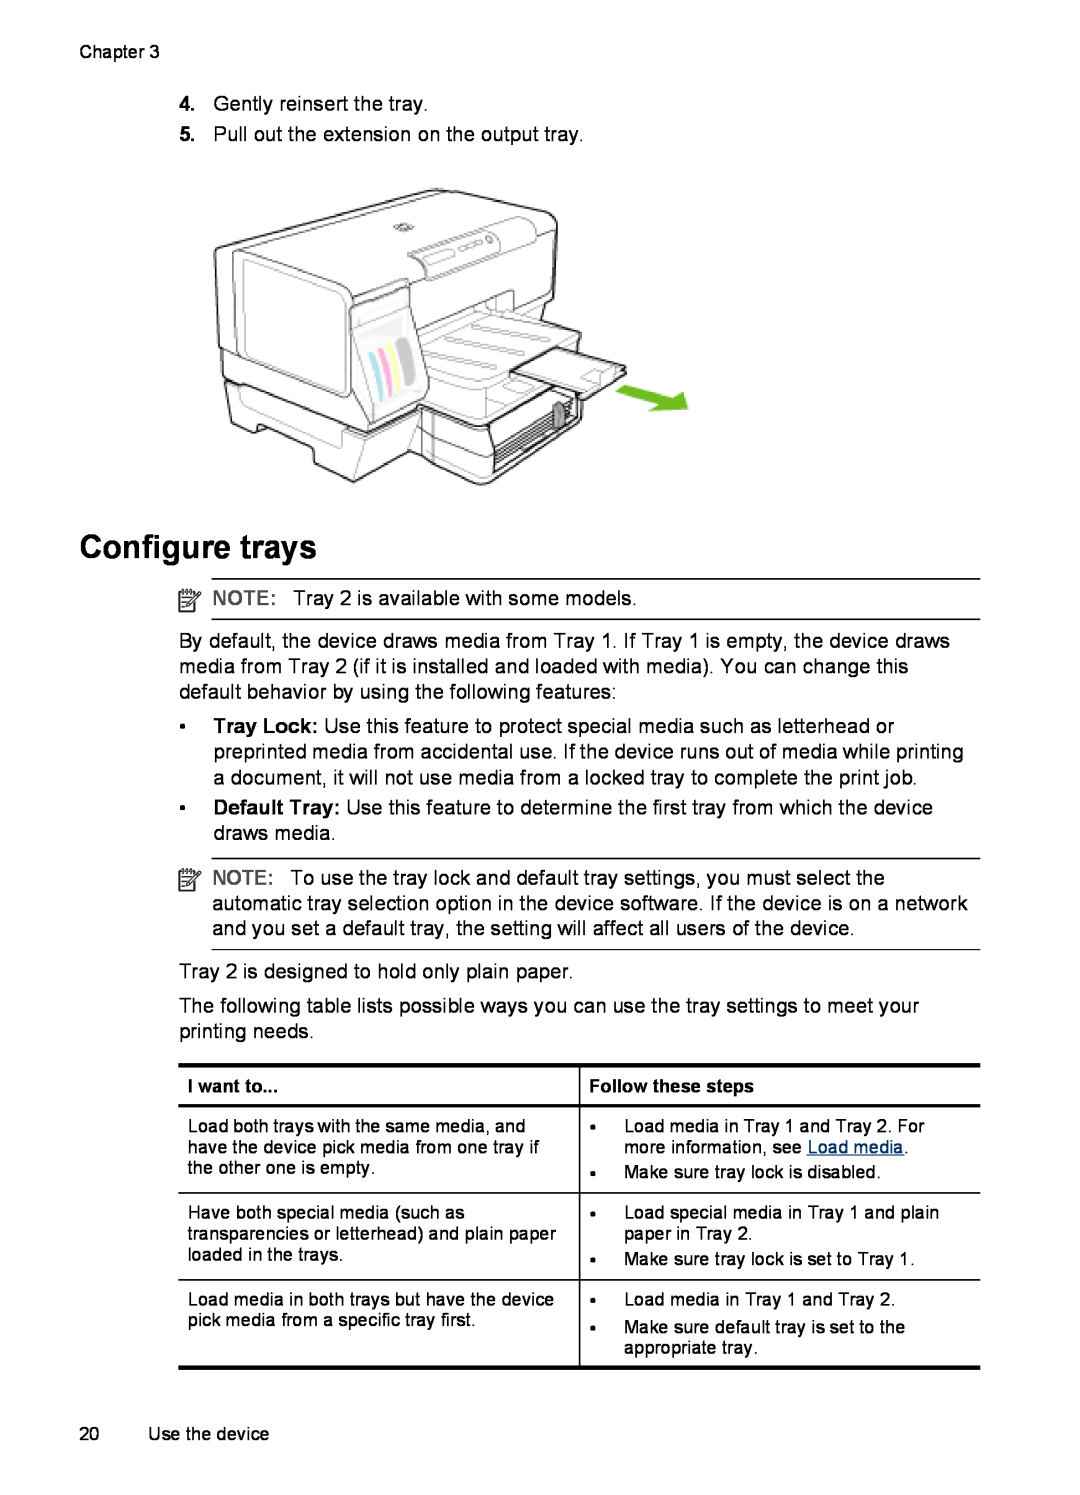 HP Pro K5400, K5300 manual Configure trays, I want to, Follow these steps 